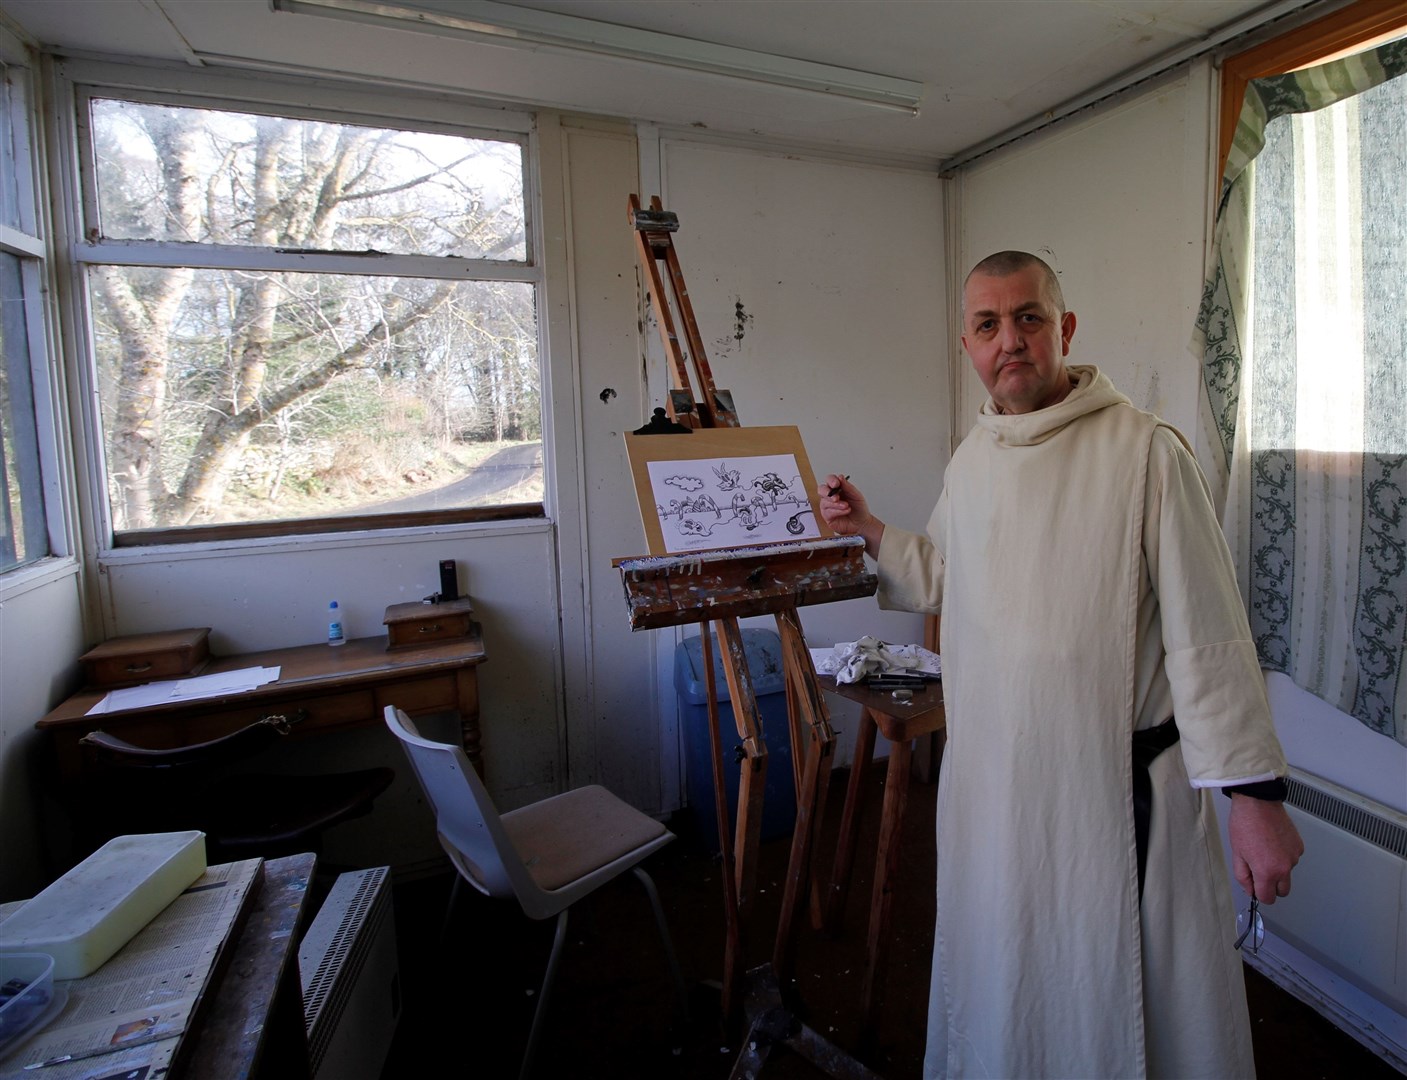 Brother Daniel Morphy will host a solo art exhibition at Pluscarden Abbey, launching next month.